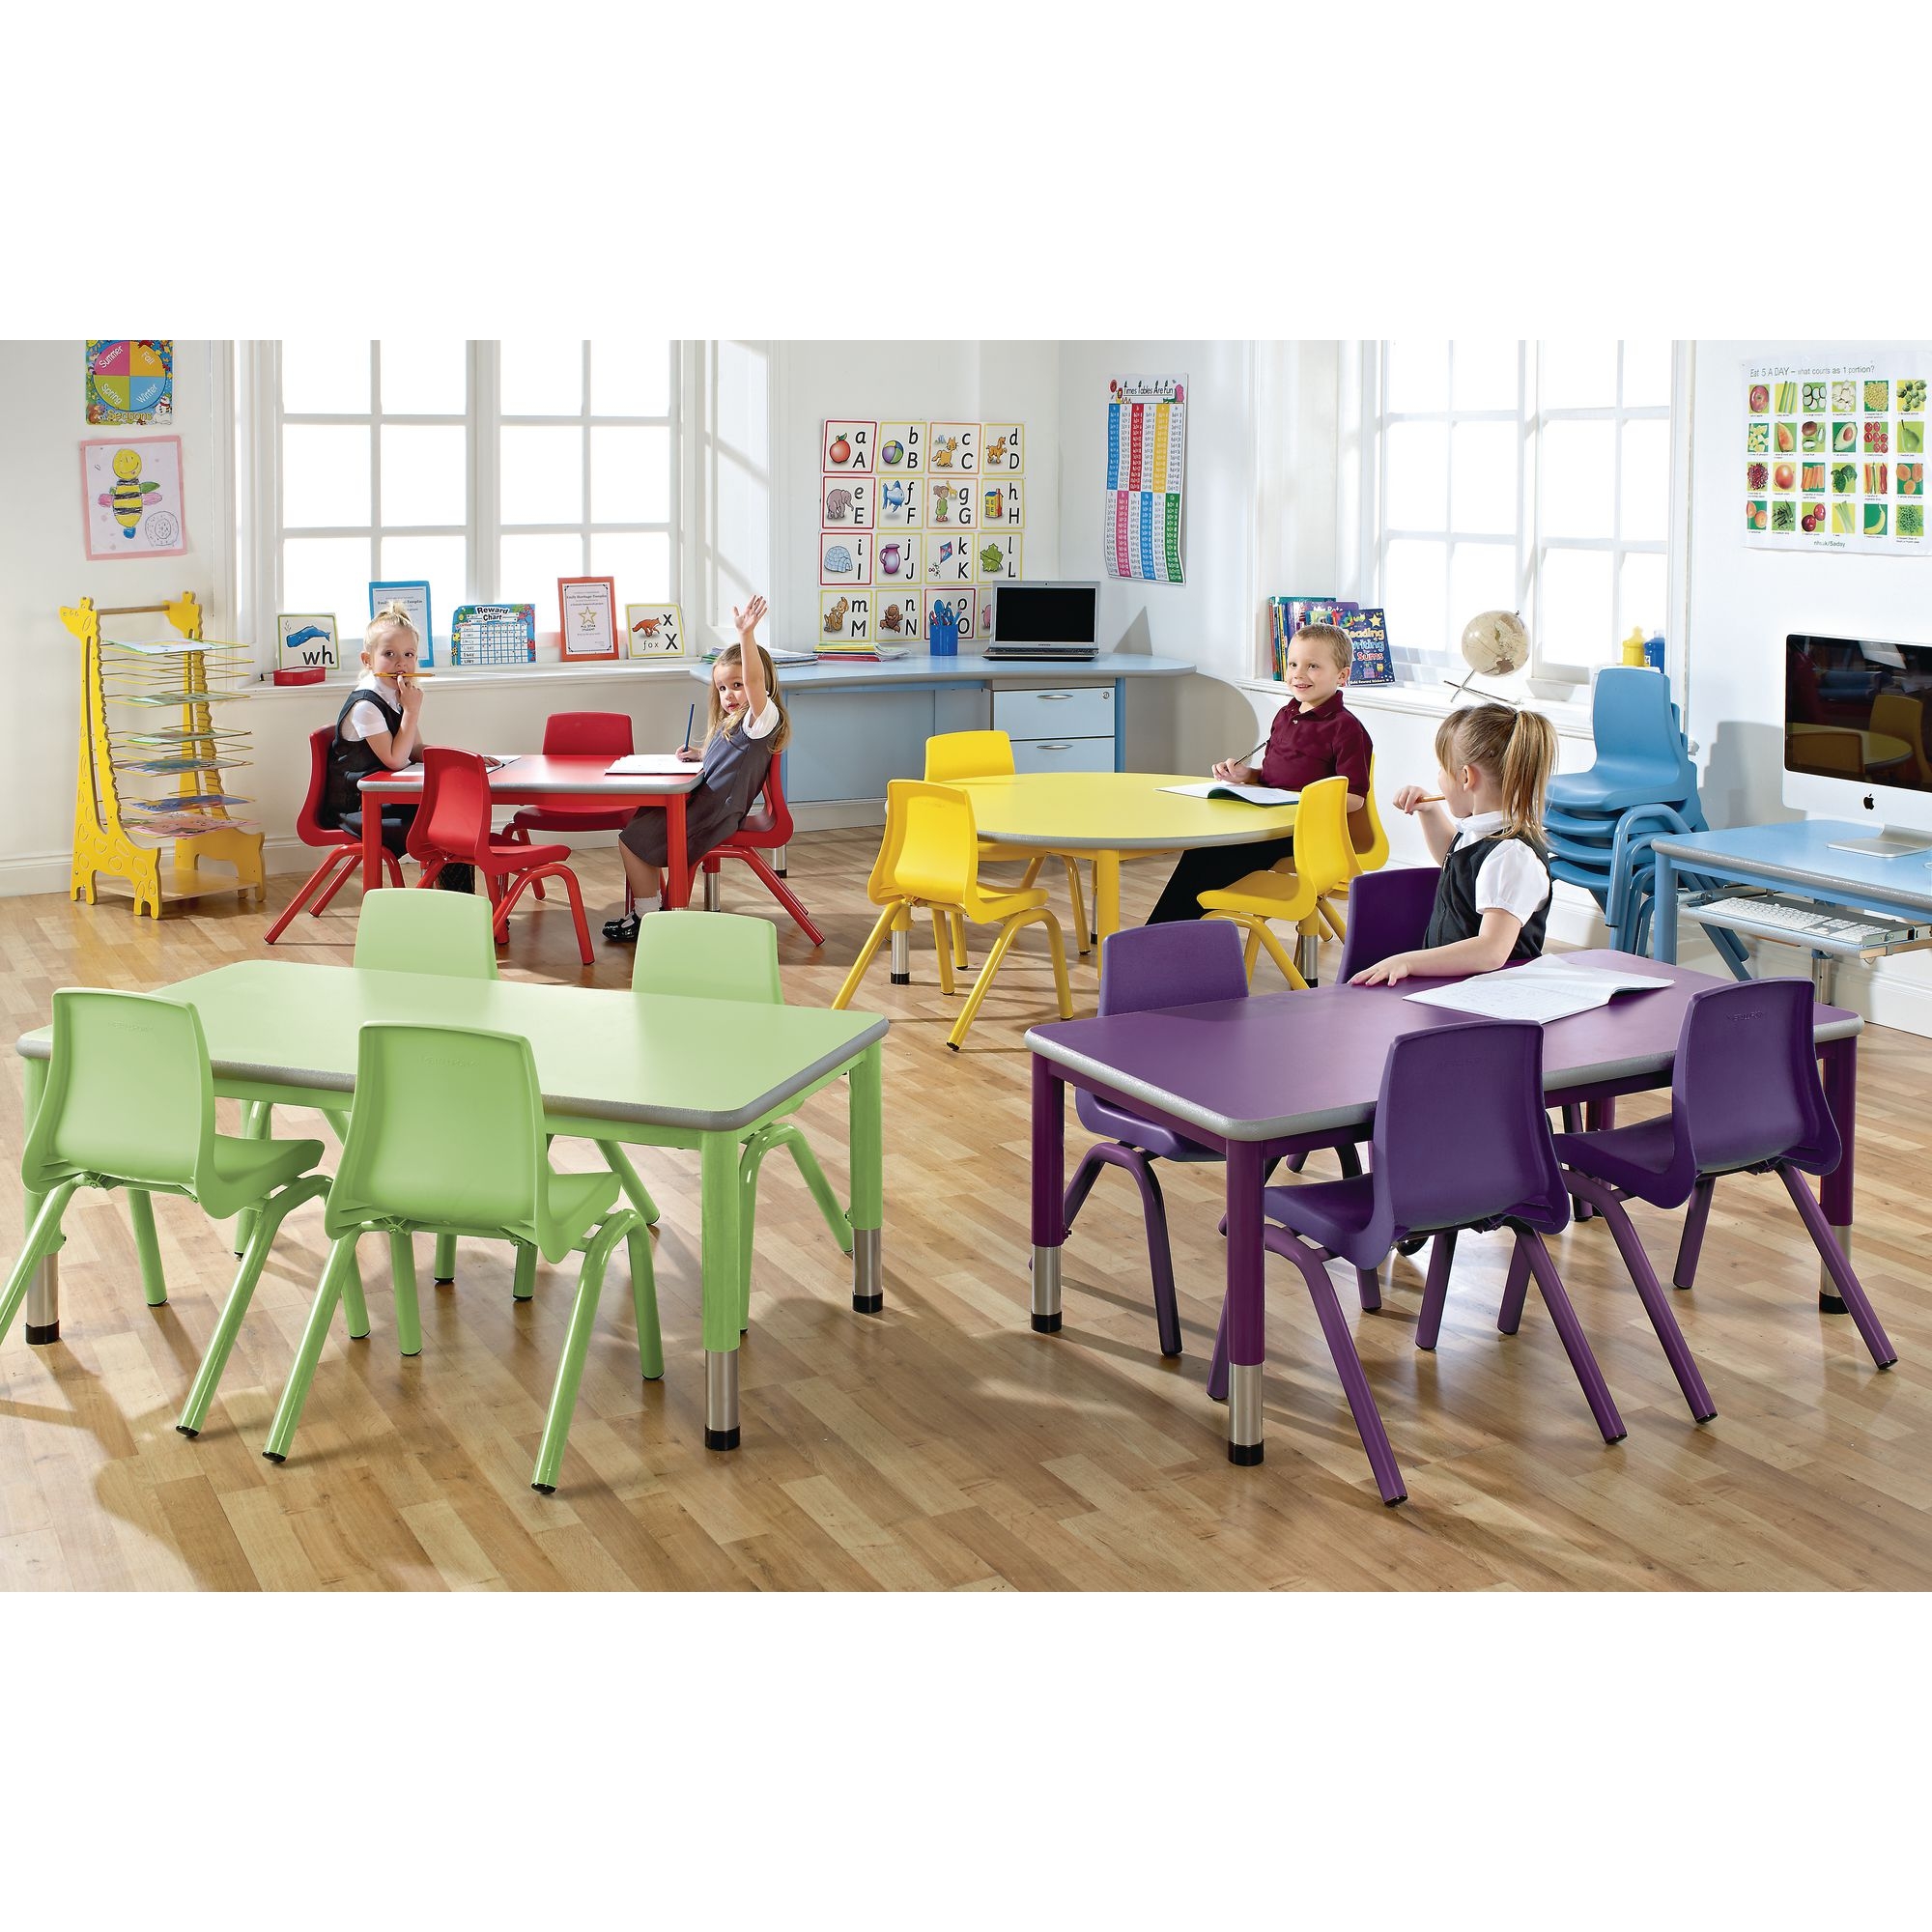 Harlequin Rectangular Height Adjustable Steel Classroom Pack: Table and 4 Chairs - 900 x 600 x 400mm - Yellow